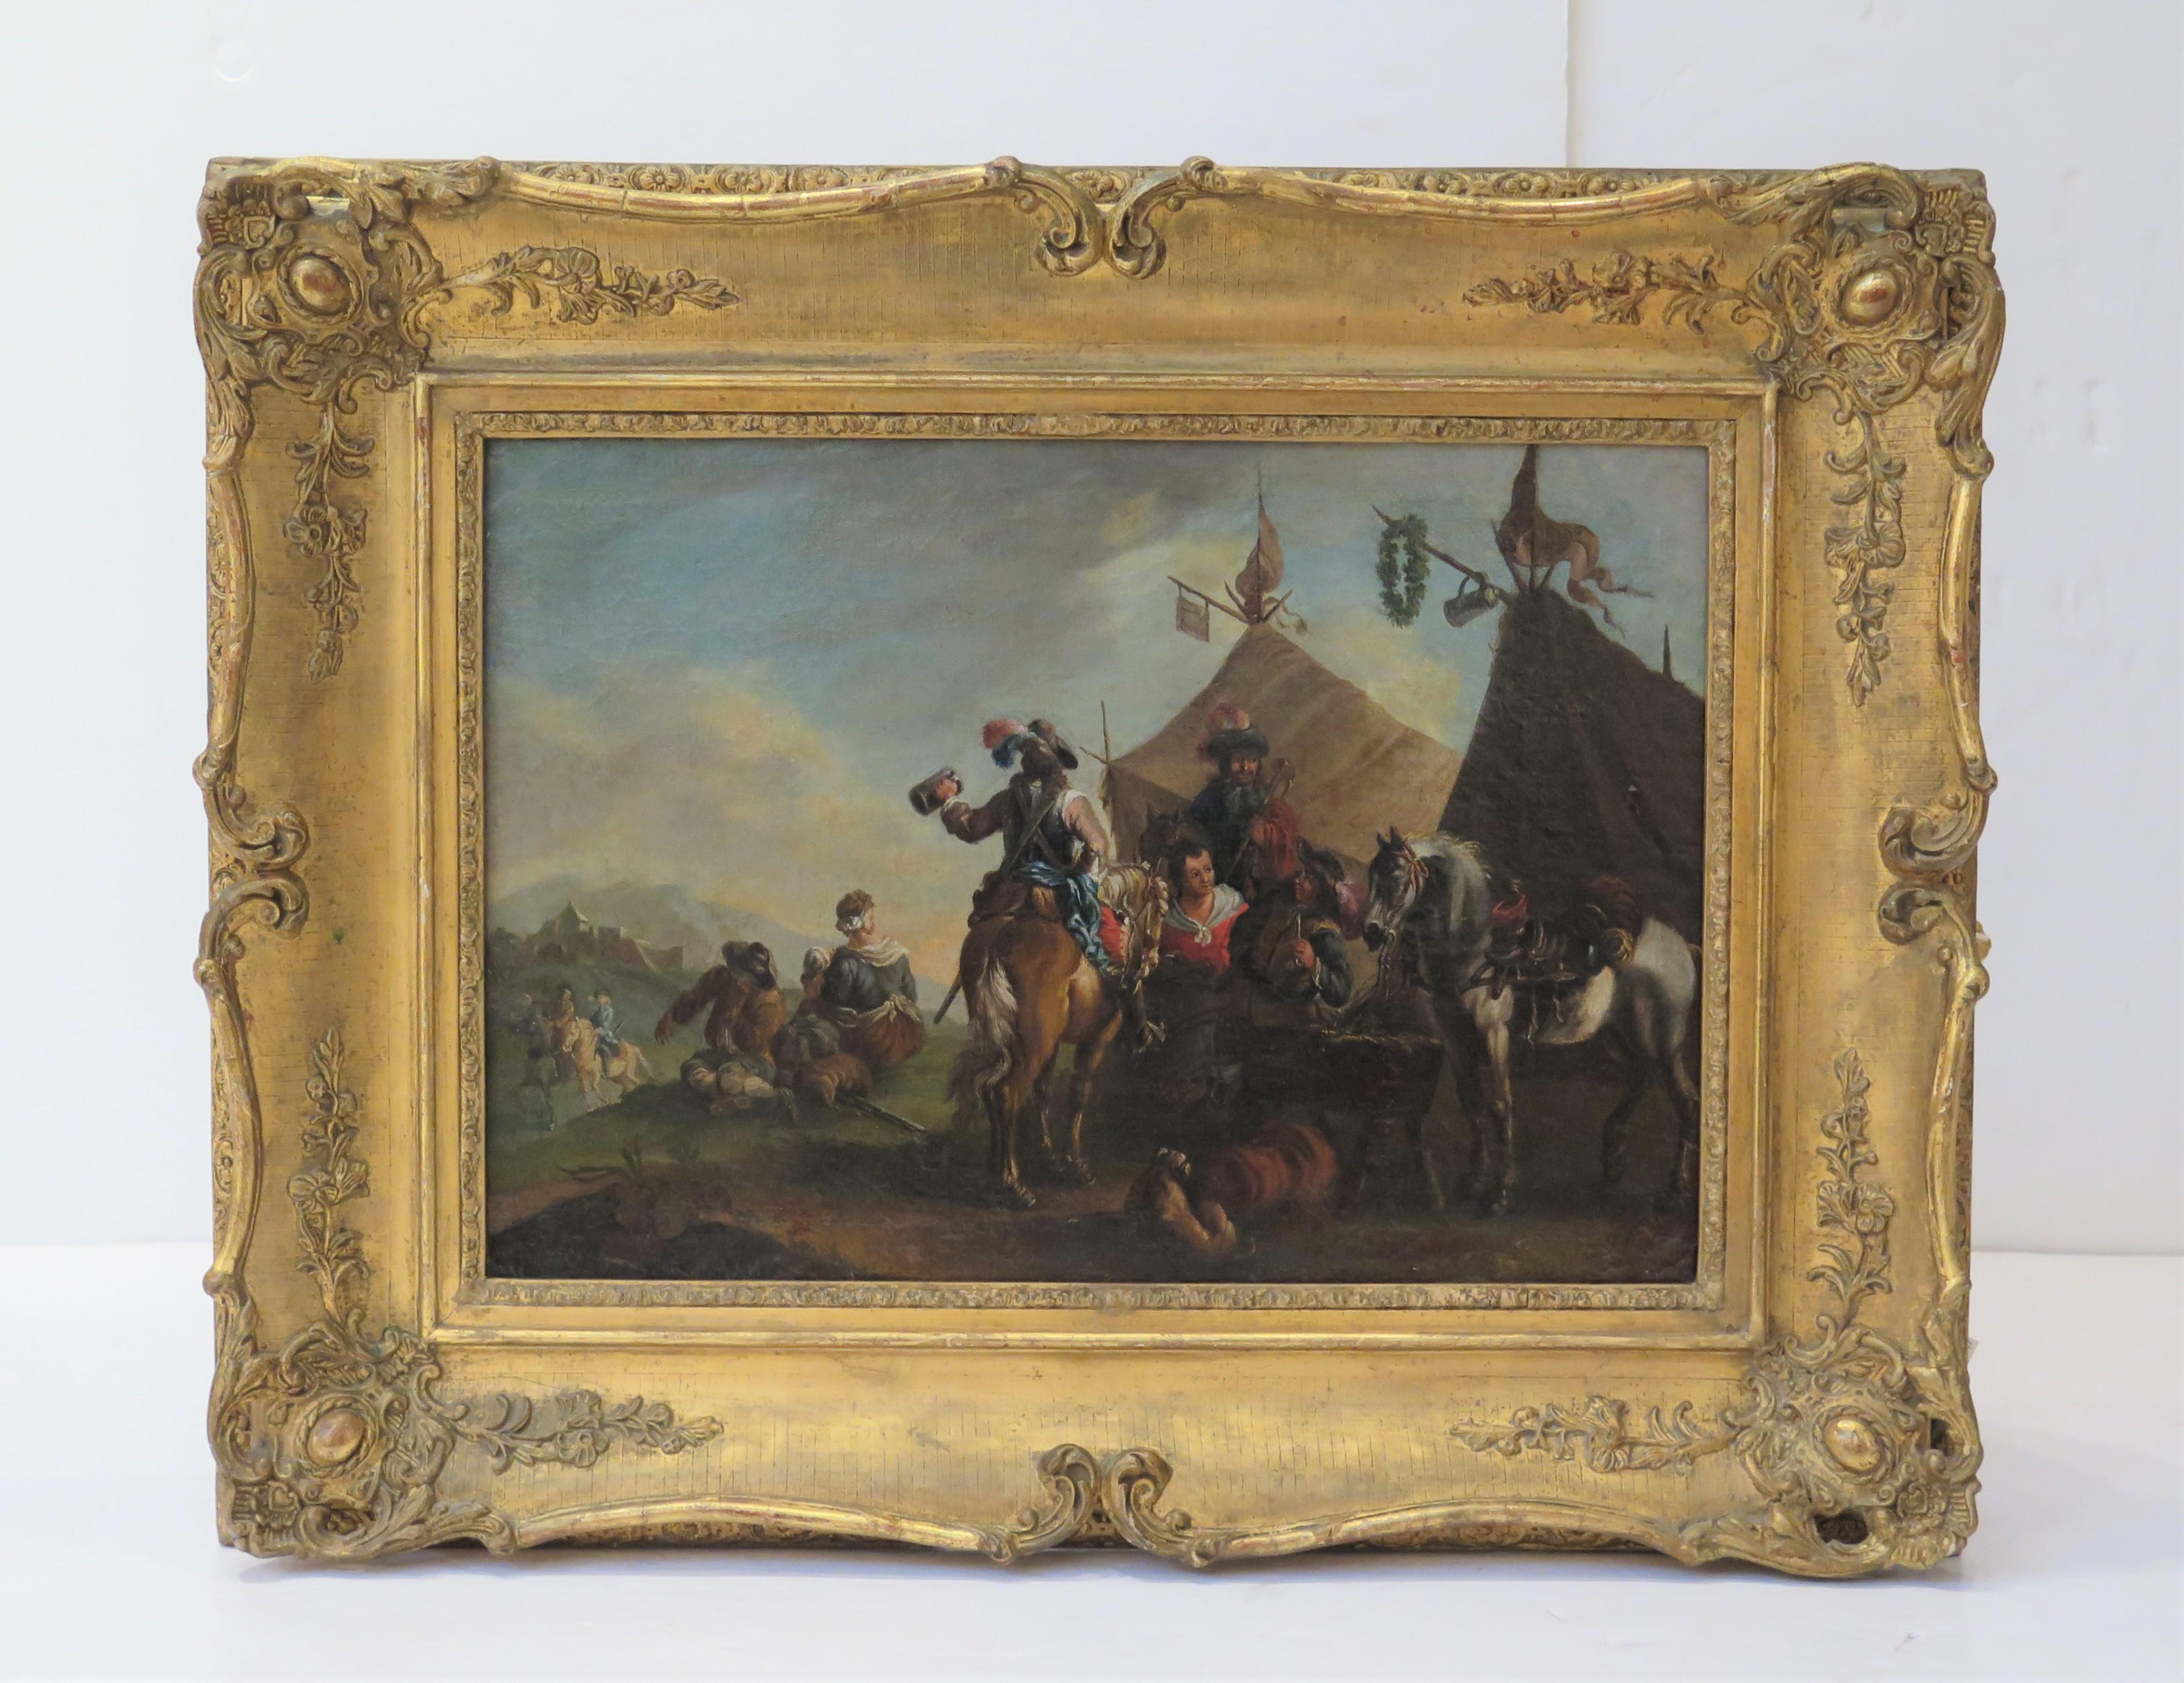 A 17th century oil on canvas picture, framed, a scene of travelers / noblemen including horses after Philips Wouwerman ( Dutch, 1619-1668 ), noblemen on horseback are drinking ale / beer and smoking pipes at what appears to be a tavern tent with